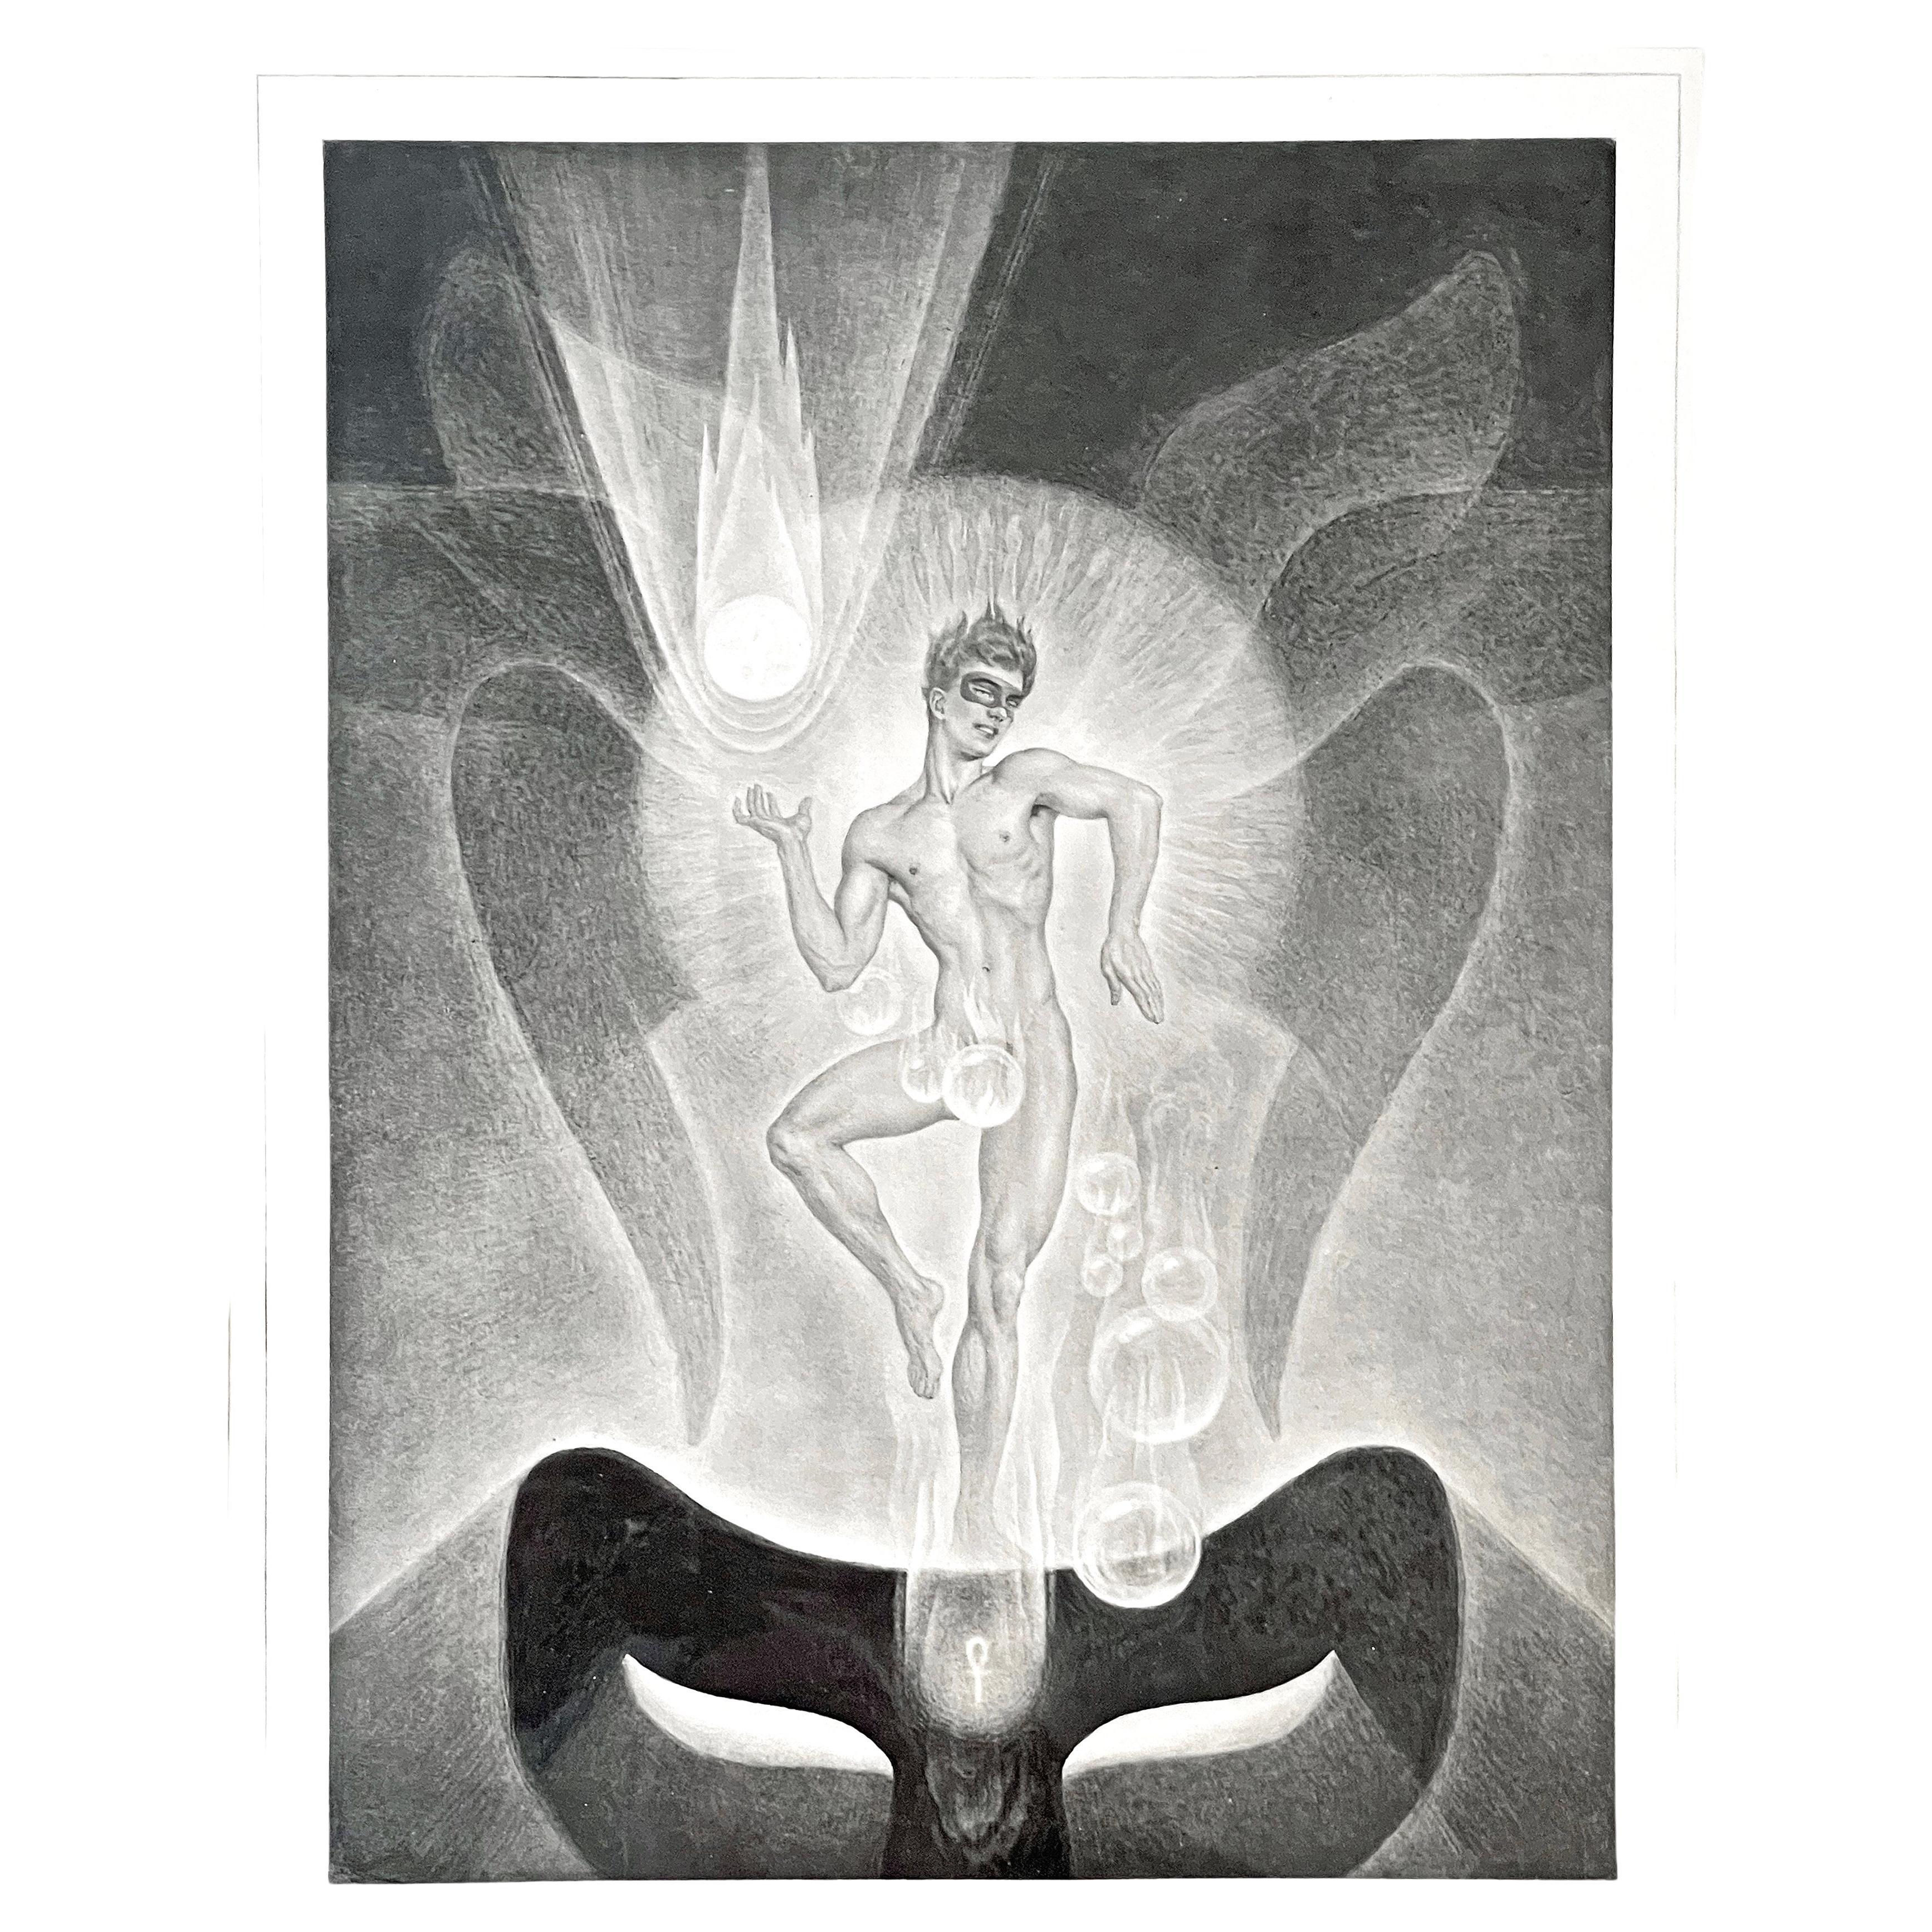 "Element of Air, " Art Deco Print with Male Nude and Atlantis Theme by Avinoff